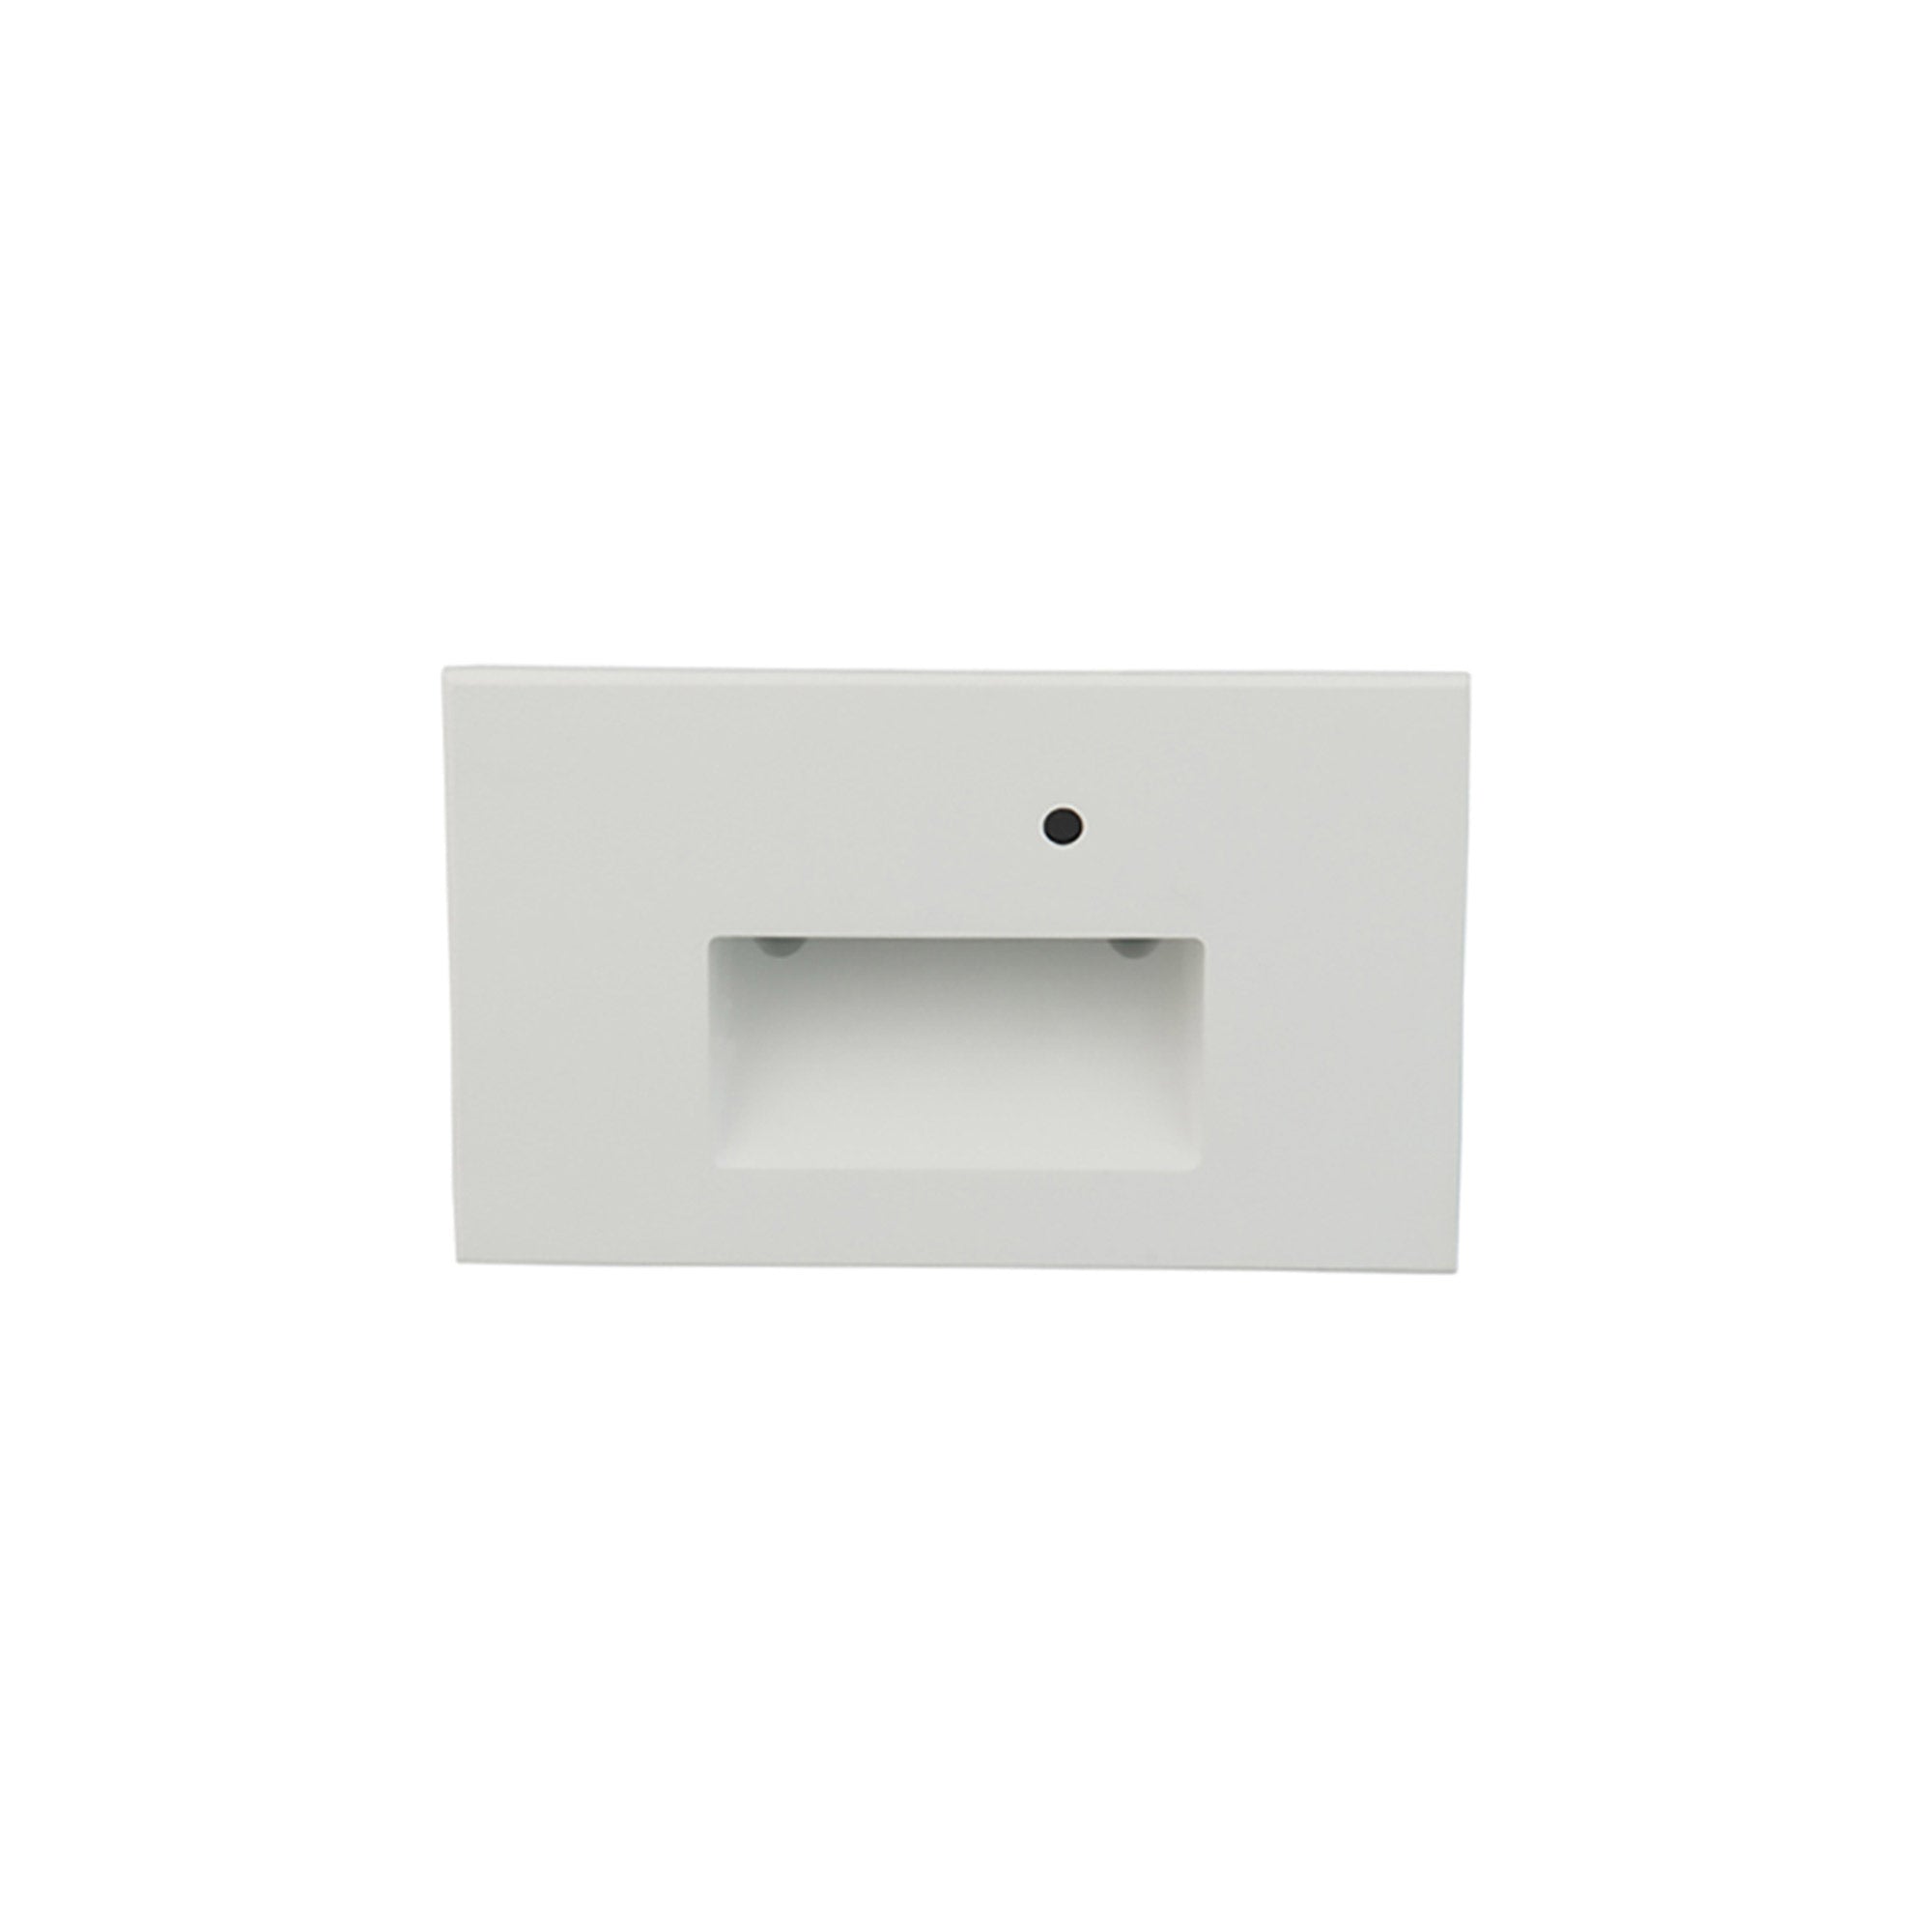 LEDme 120V LED Horizontal Indoor/Outdoor Step and Wall Light with Daylight Photocell Sensor